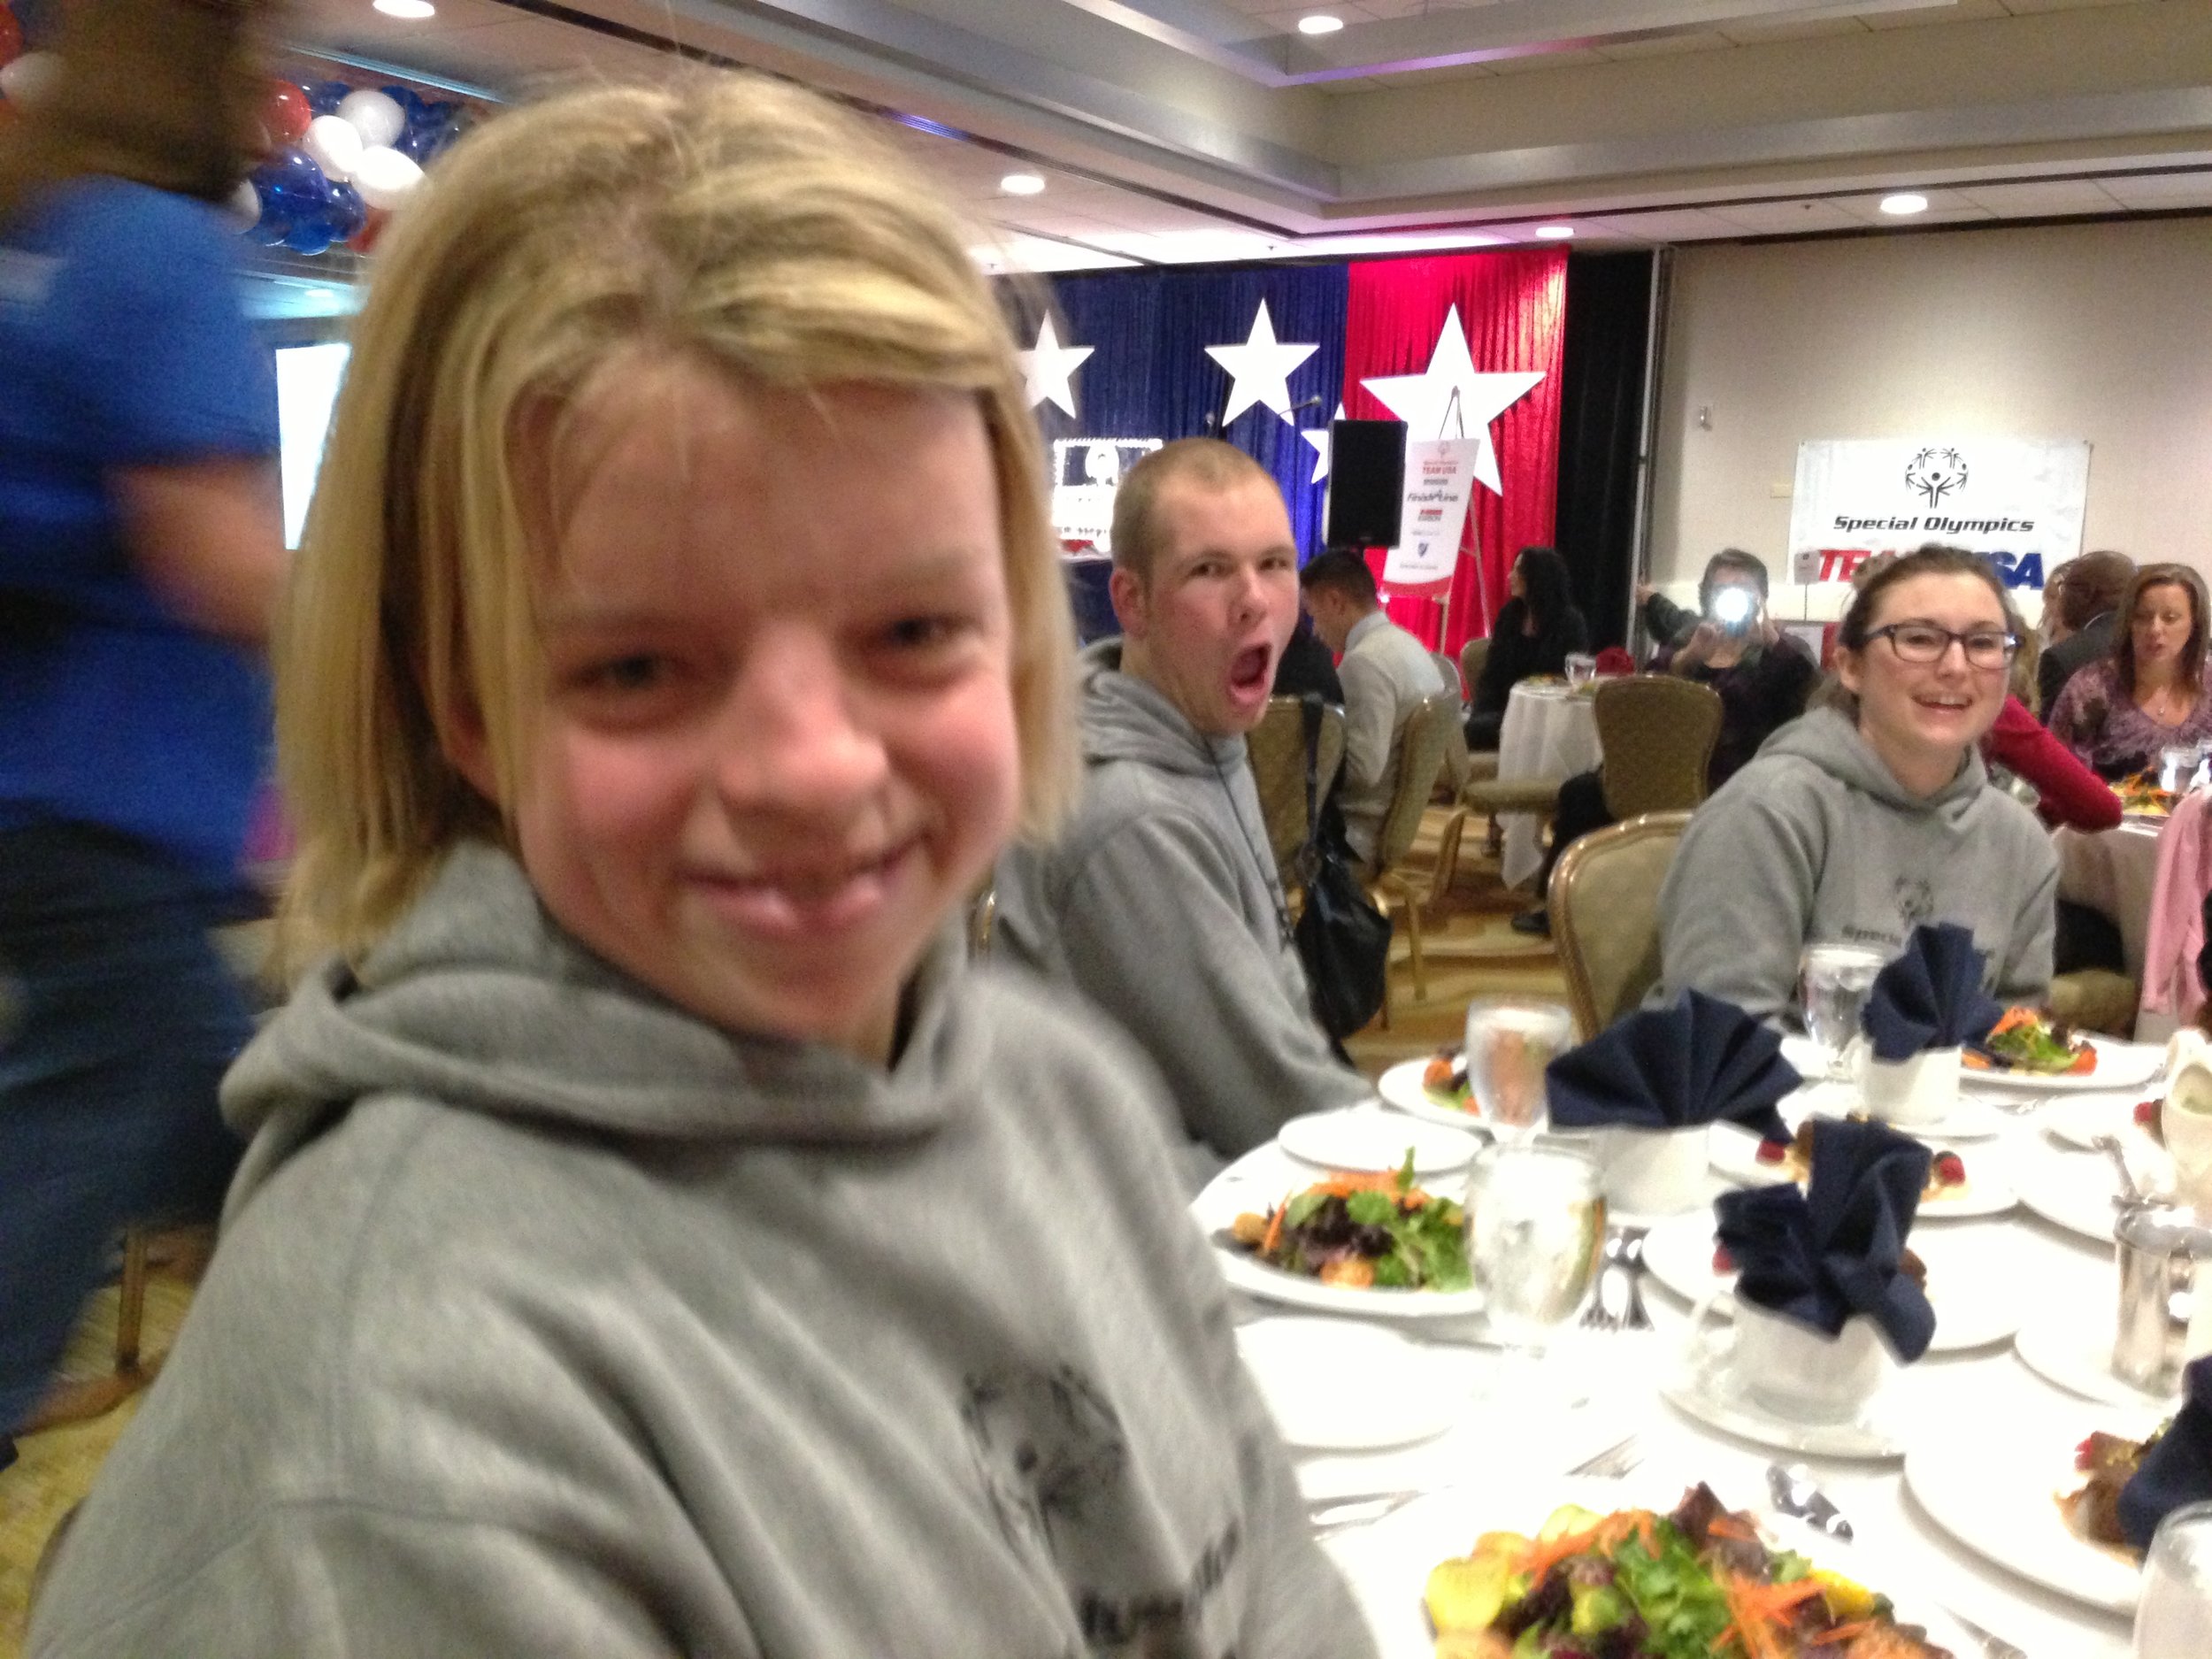 Daina Shilts, 22, of Neillsville, Wis., Special Olympics snowboarder